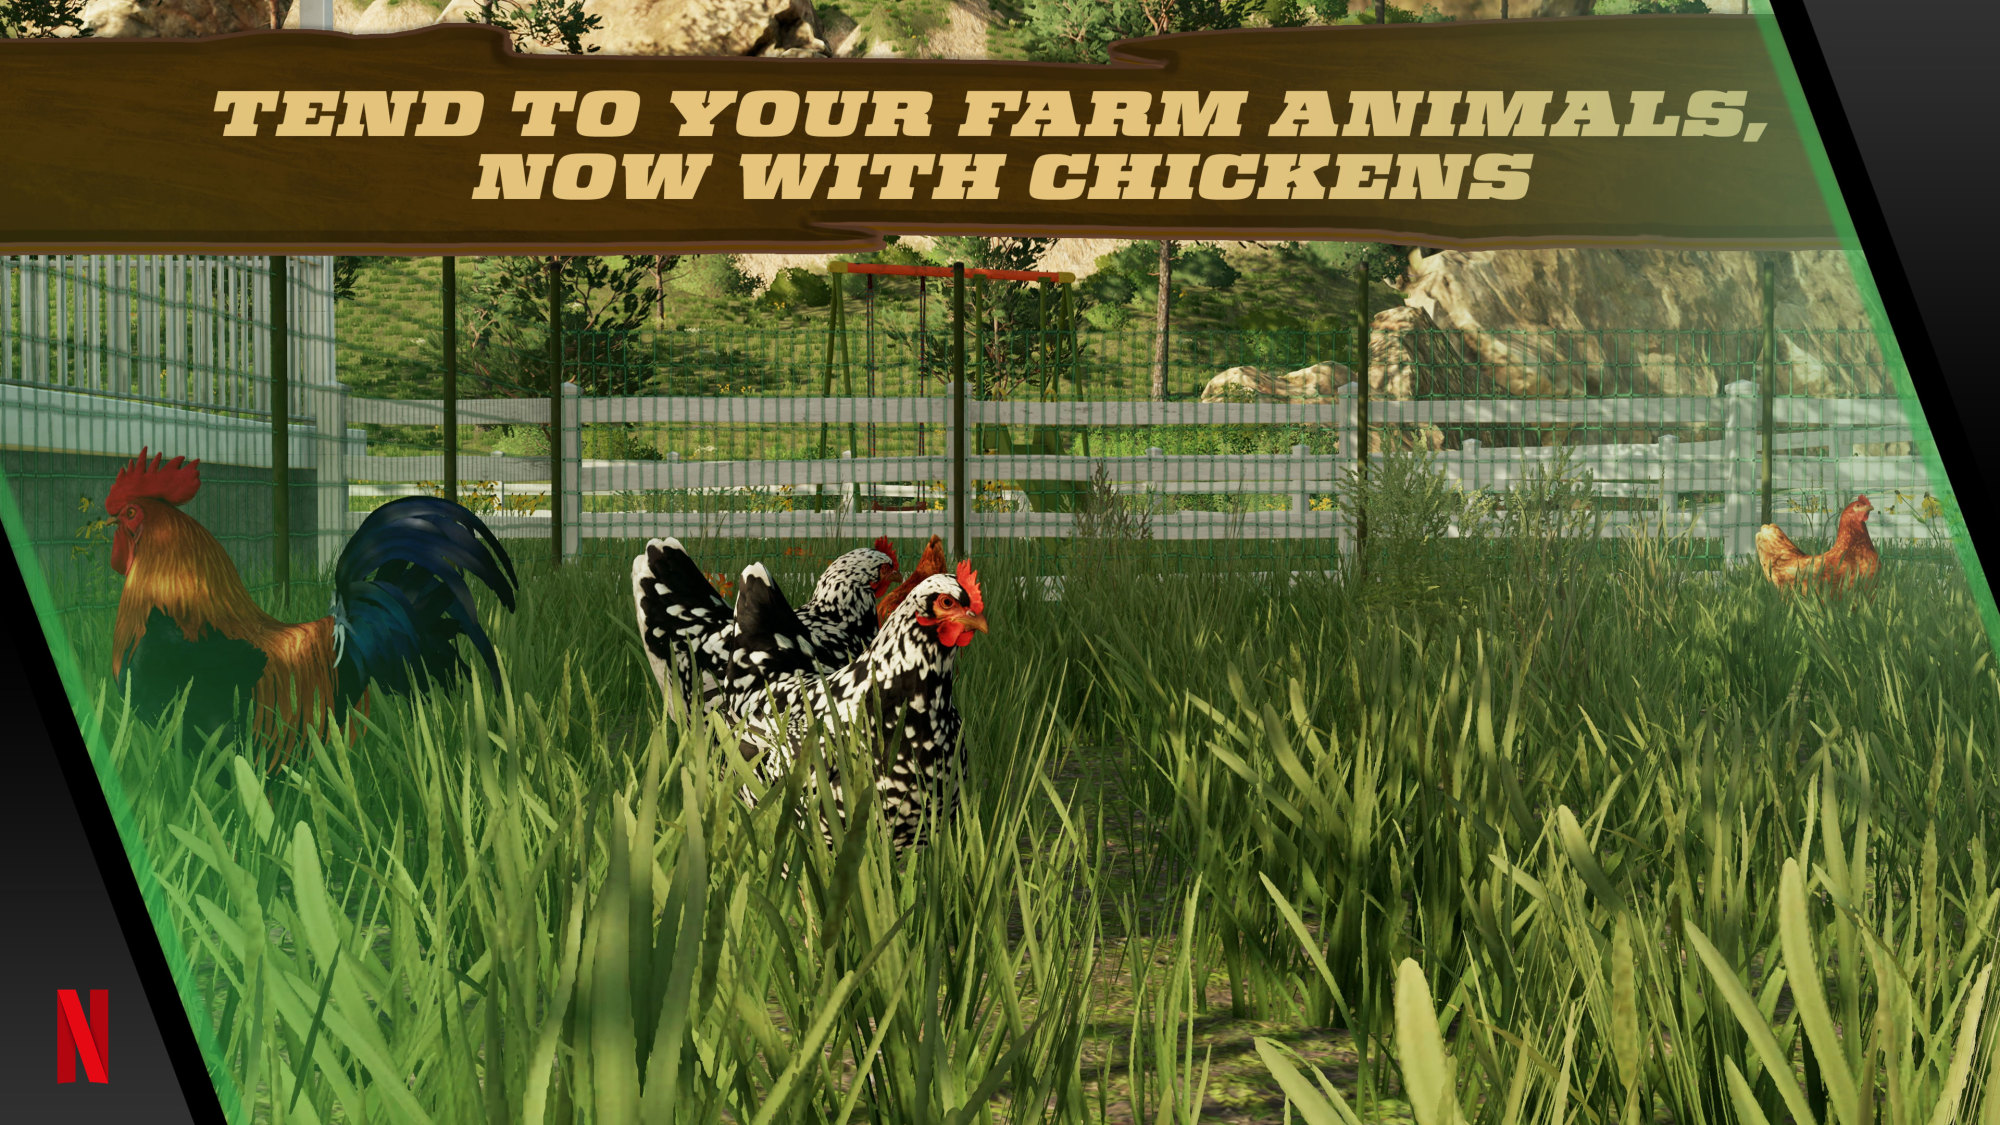 Farming Simulator - Mobile Farmers or those who want to become one